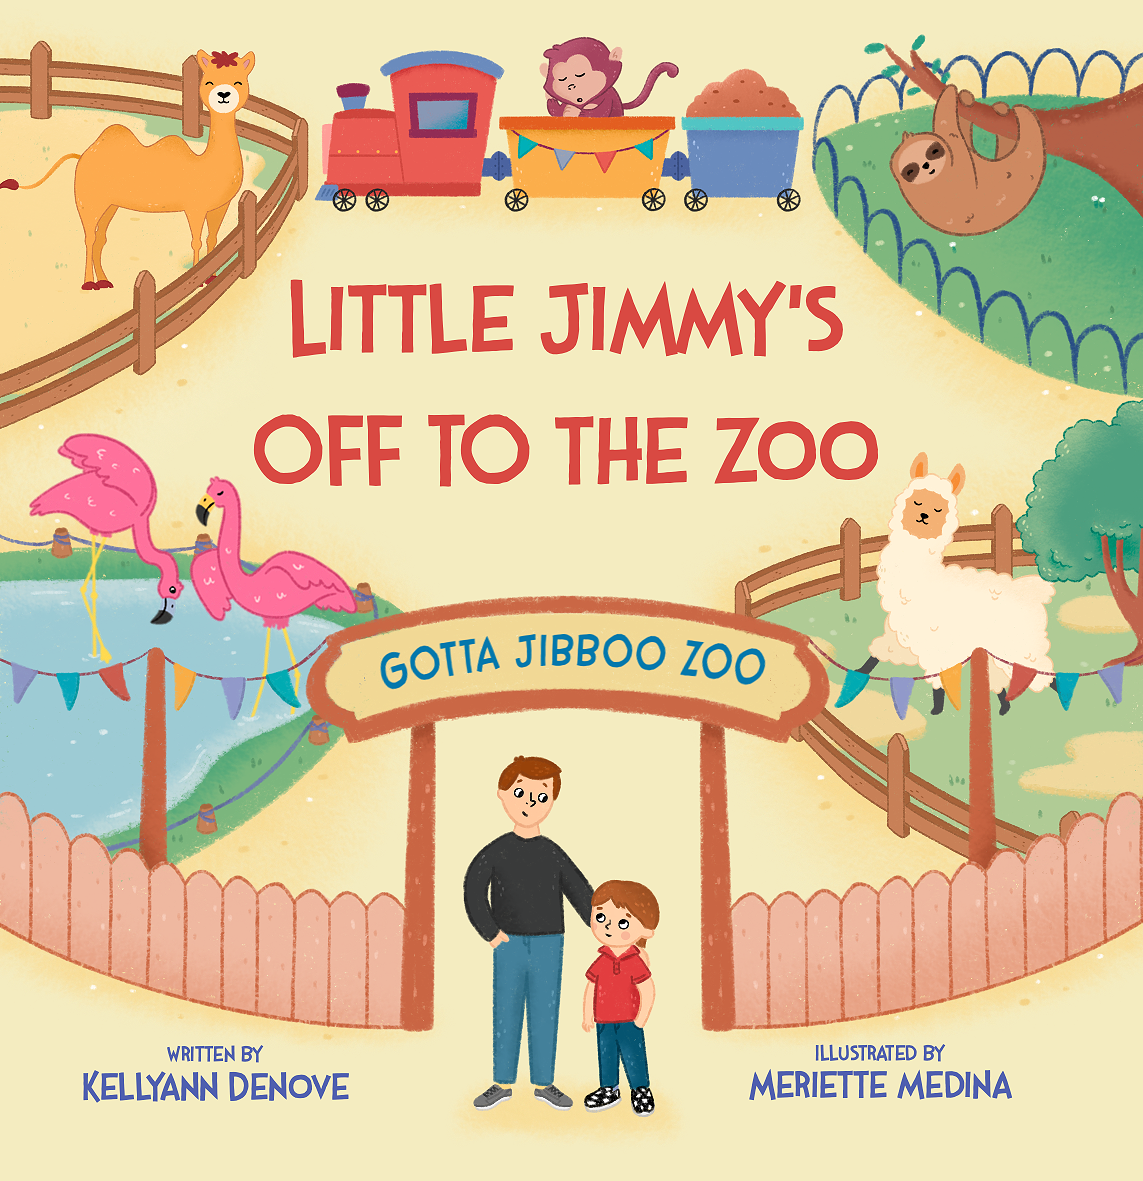 Little Jimmy's Off to the Zoo (NOW AVAILABLE)